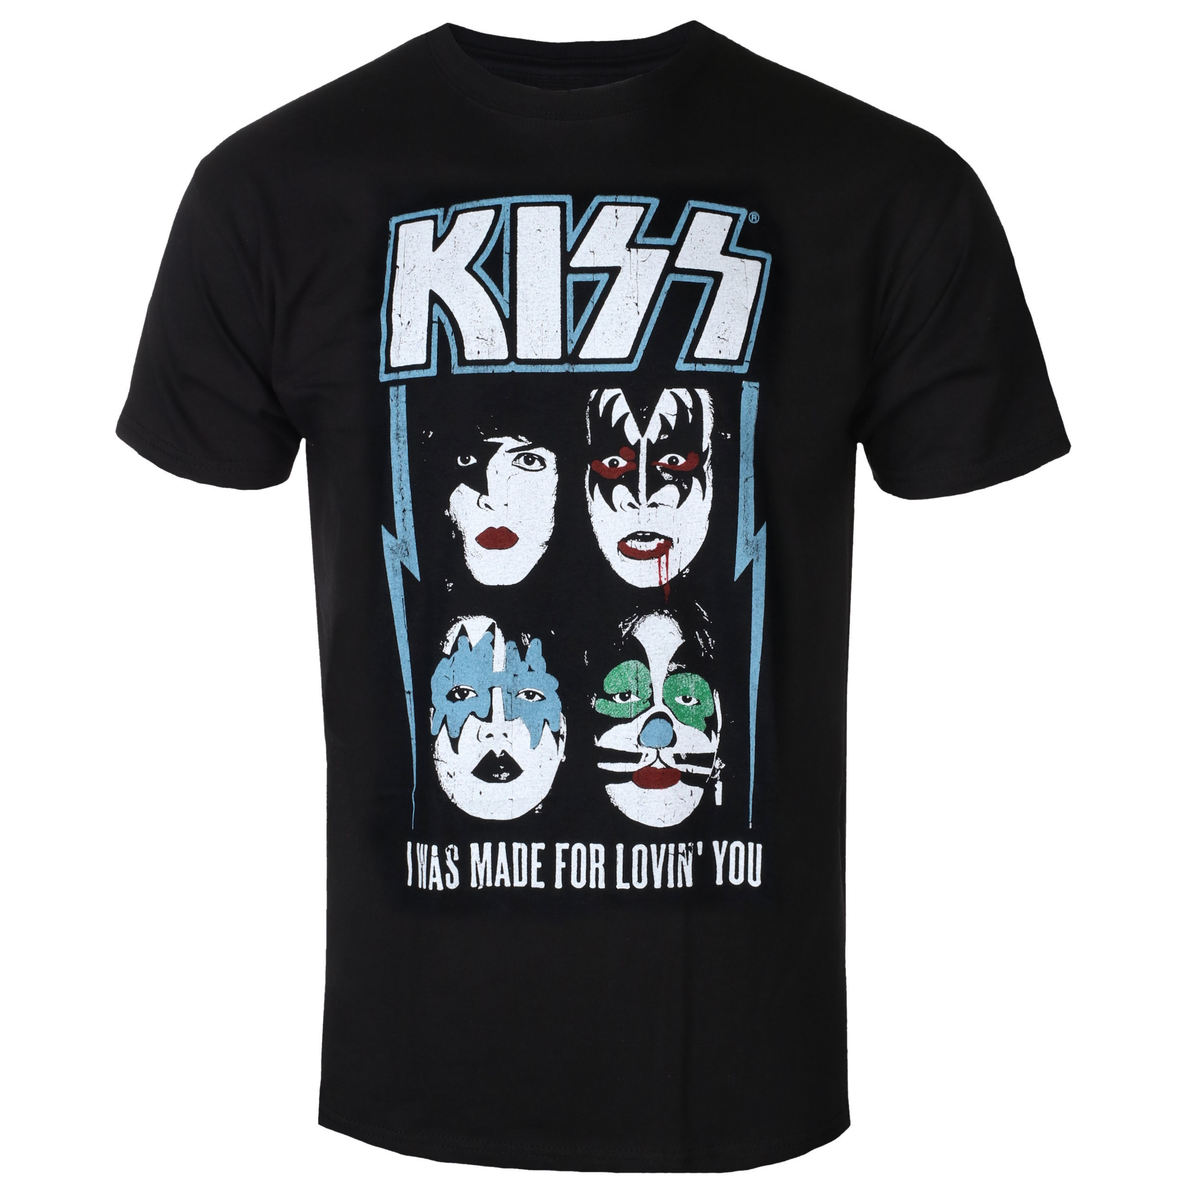 KISS - Made For Lovin' You (Small)